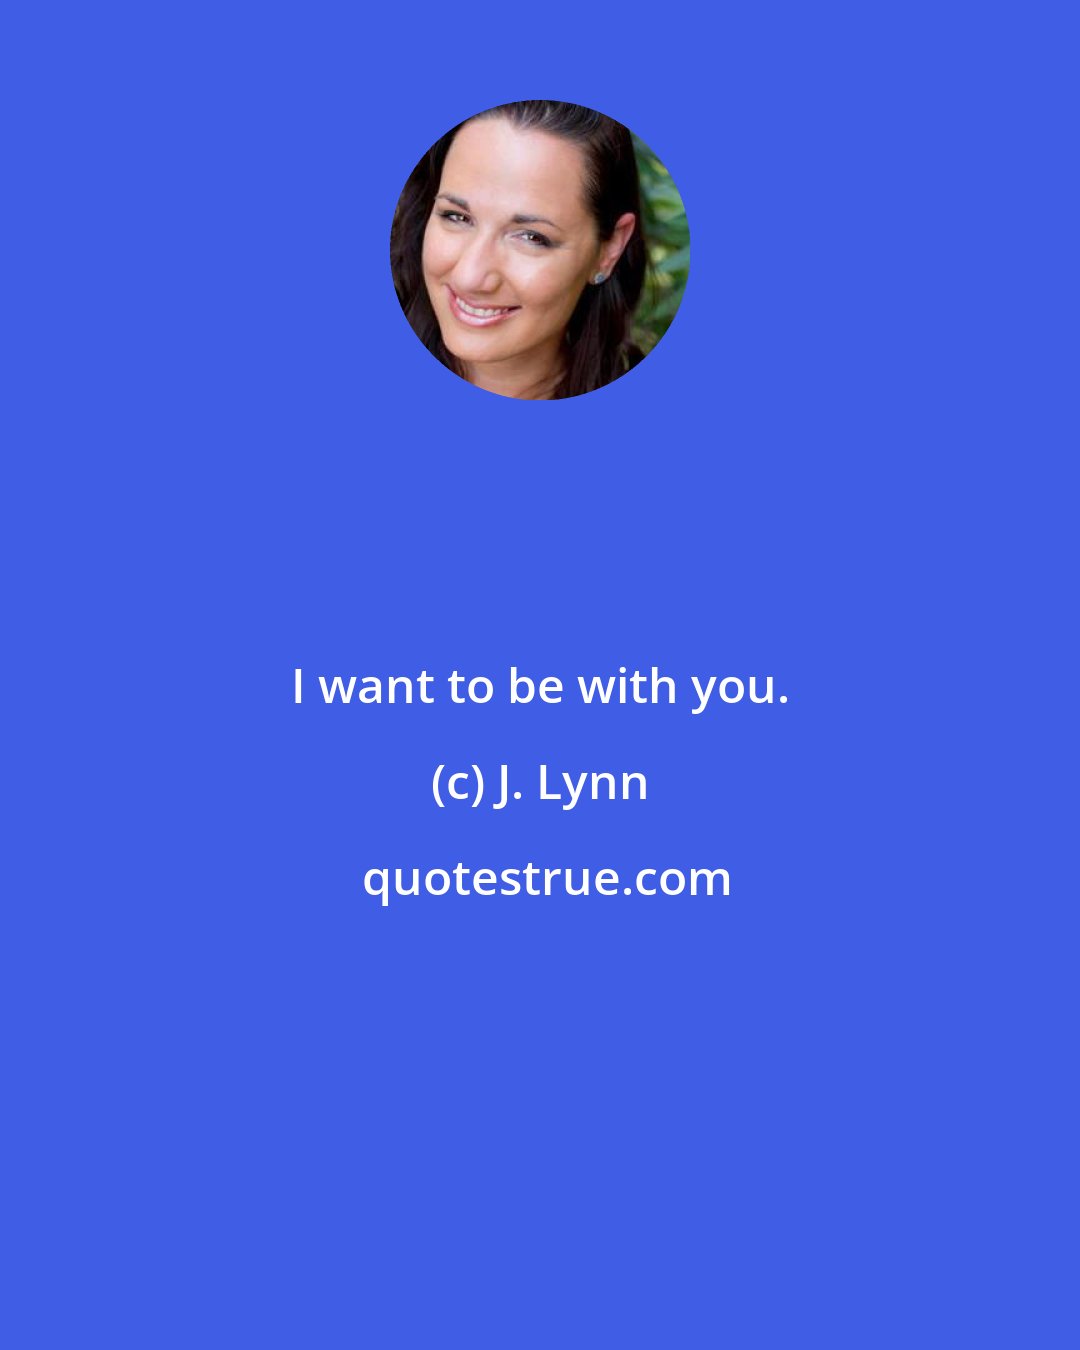 J. Lynn: I want to be with you.